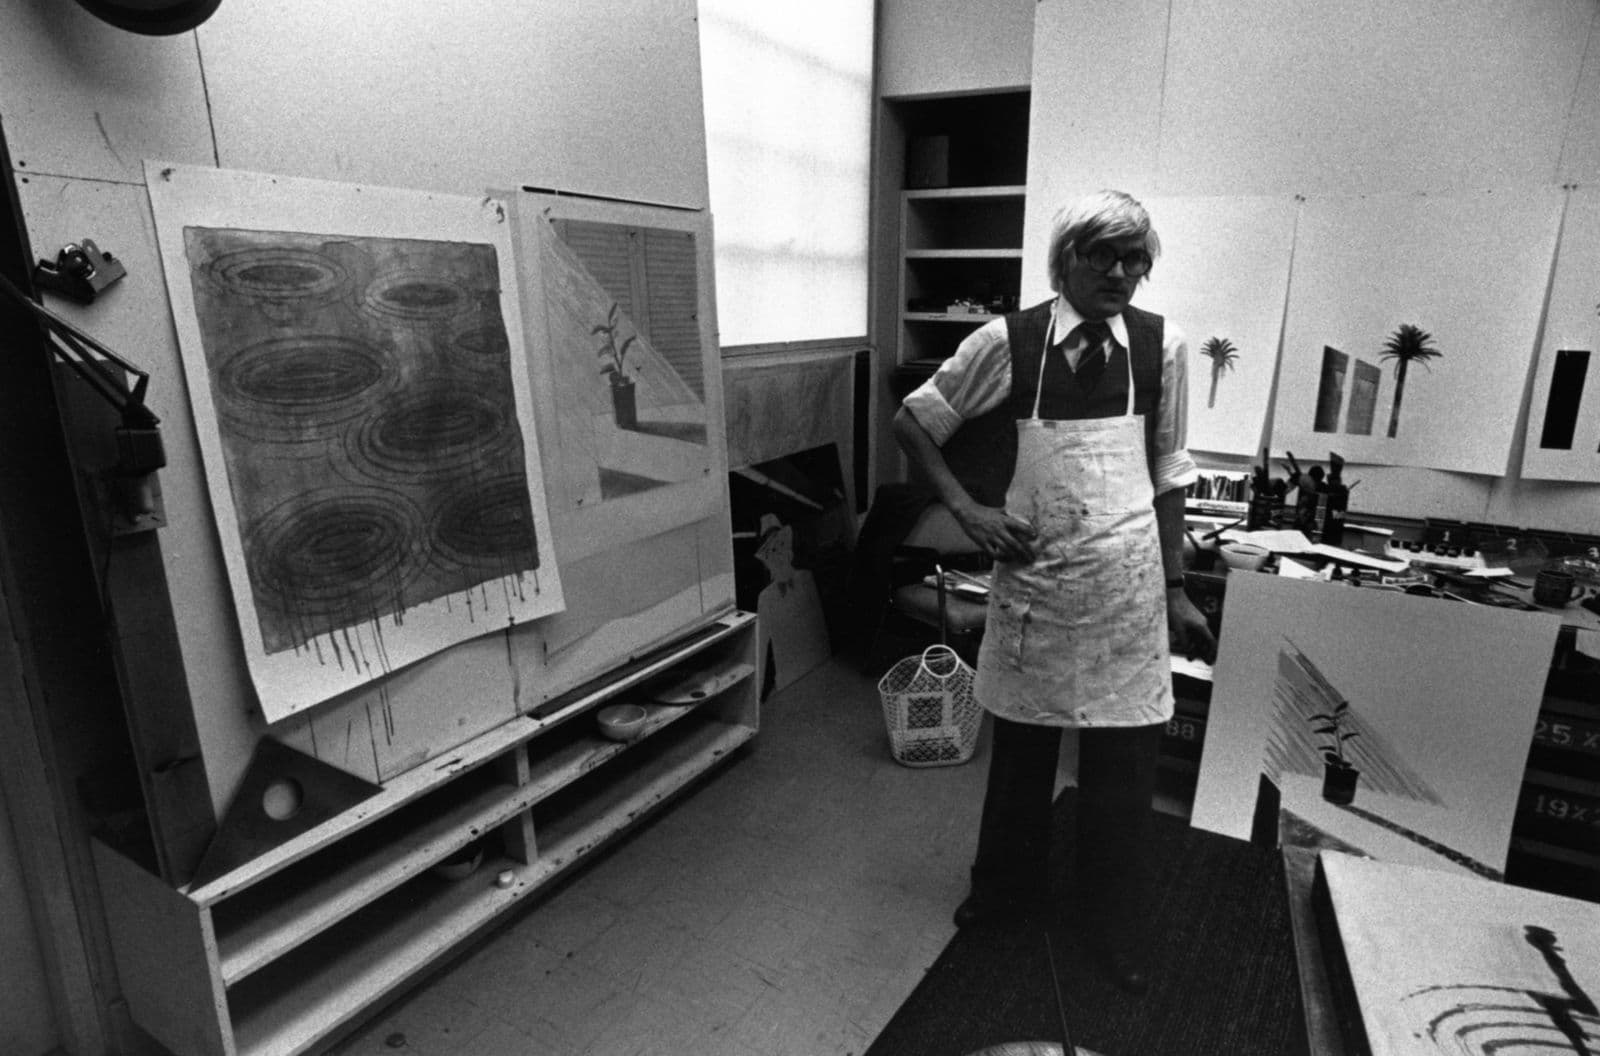 The artist David Hockney, sporting a golden bowl of straw-like hair, and the thickest of rimmed glasses, stands neutrally in the middle of a room, wearing an apron. He is surrounded by lithographs of climactic conditions that he has encountered in Los Angeles.